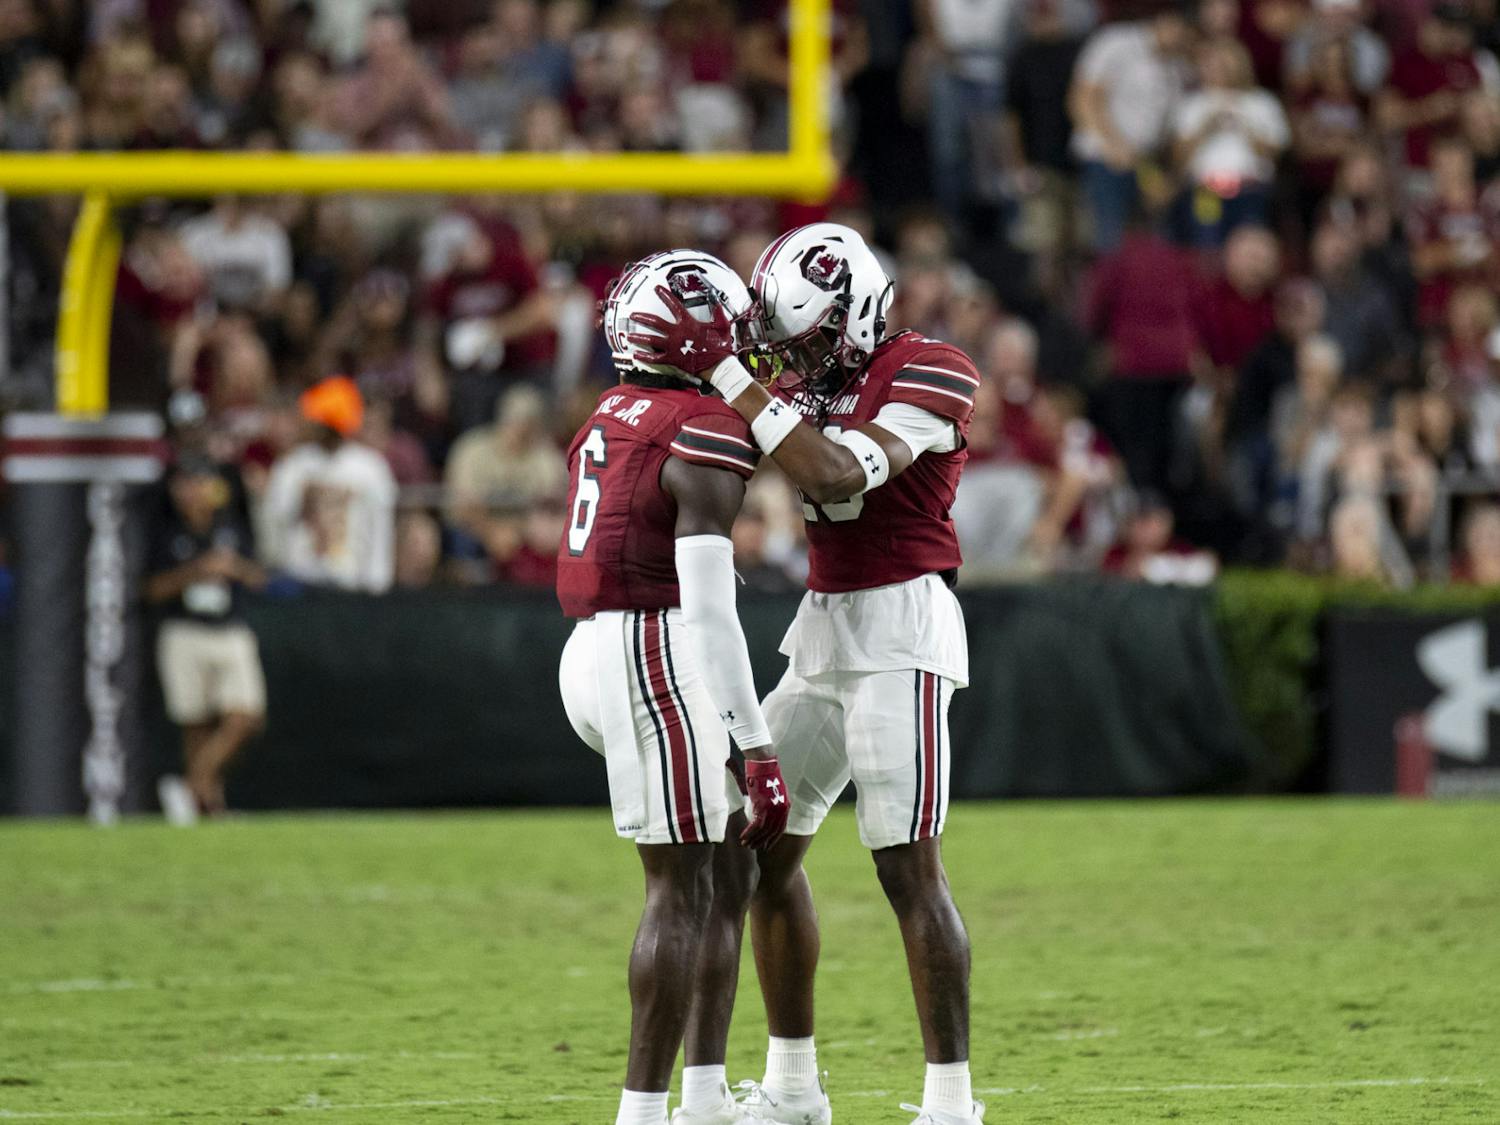 Graduate tight end Joshua Simon and redshirt freshman wide receiver Kylic Horton bring their helmets together after Simon makes an important catch in the third quarter on Sept. 23, 2023. The Gamecocks defeated the Bulldogs 37-30.